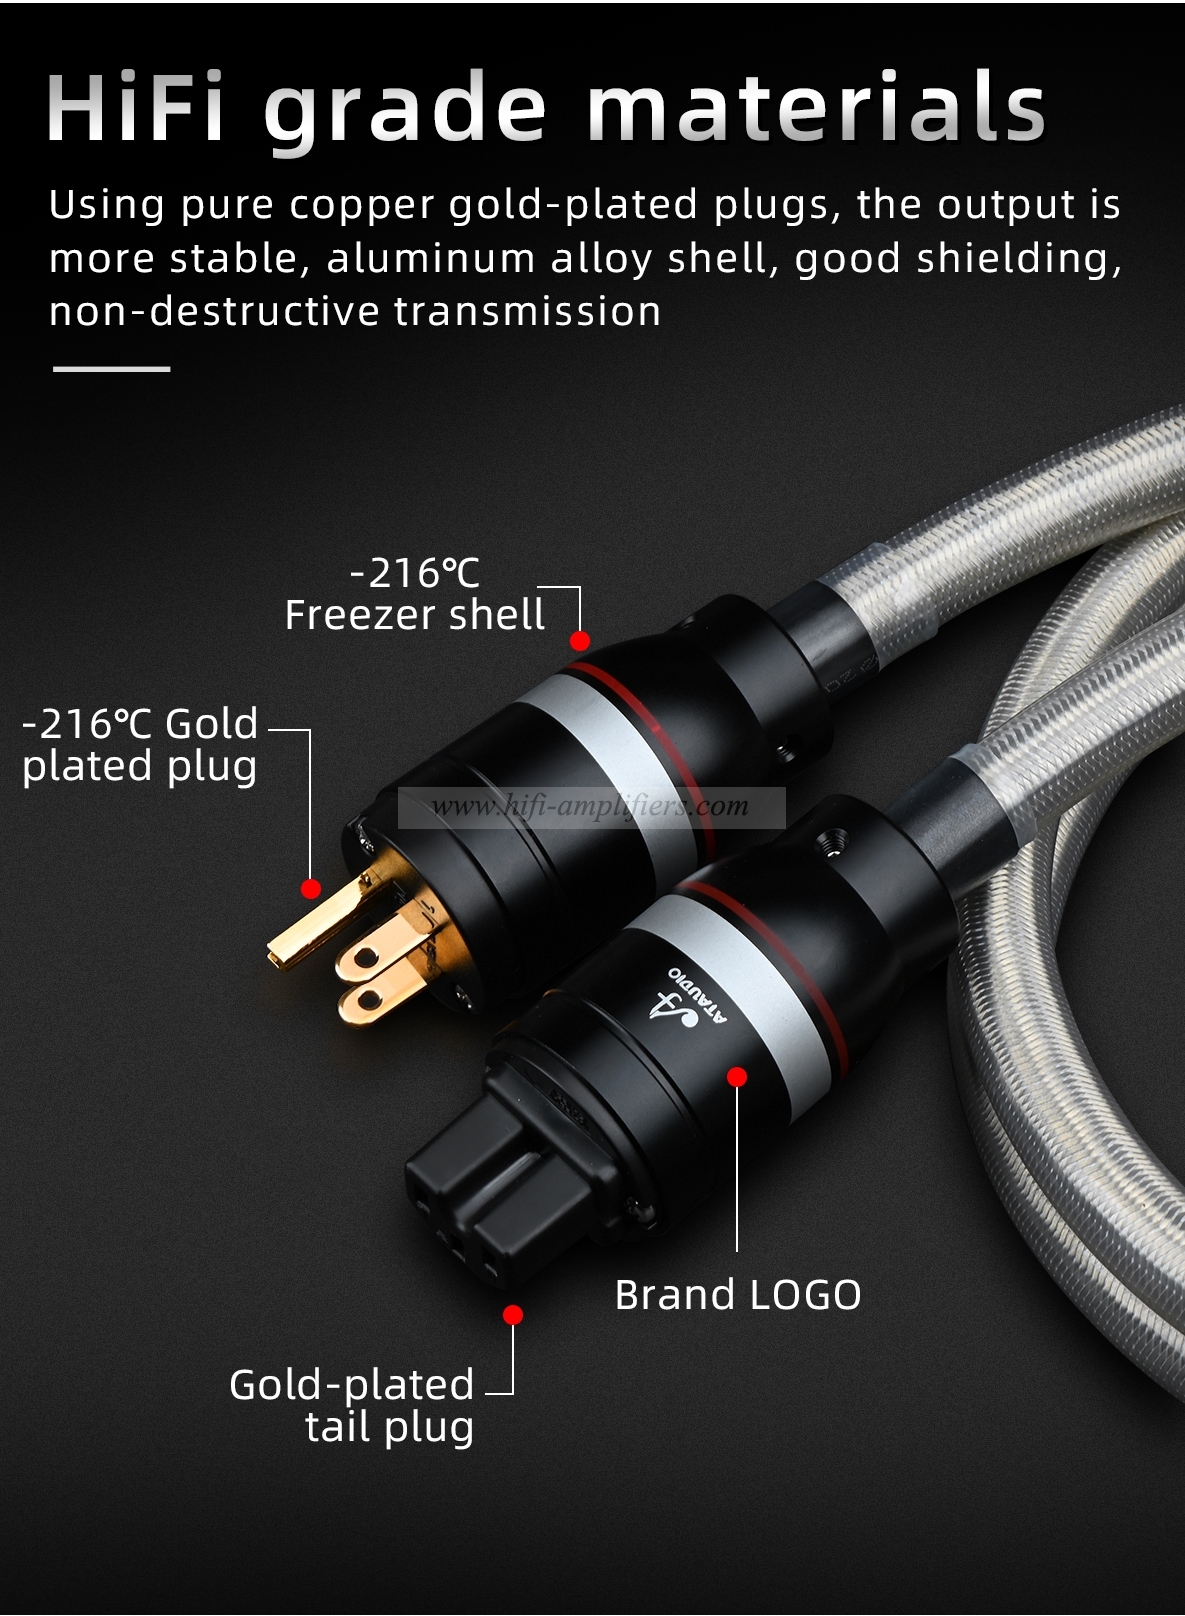 HiFi Power Cable High Quality Copper and Silver Extension Power Cord With Schuko Power Plug